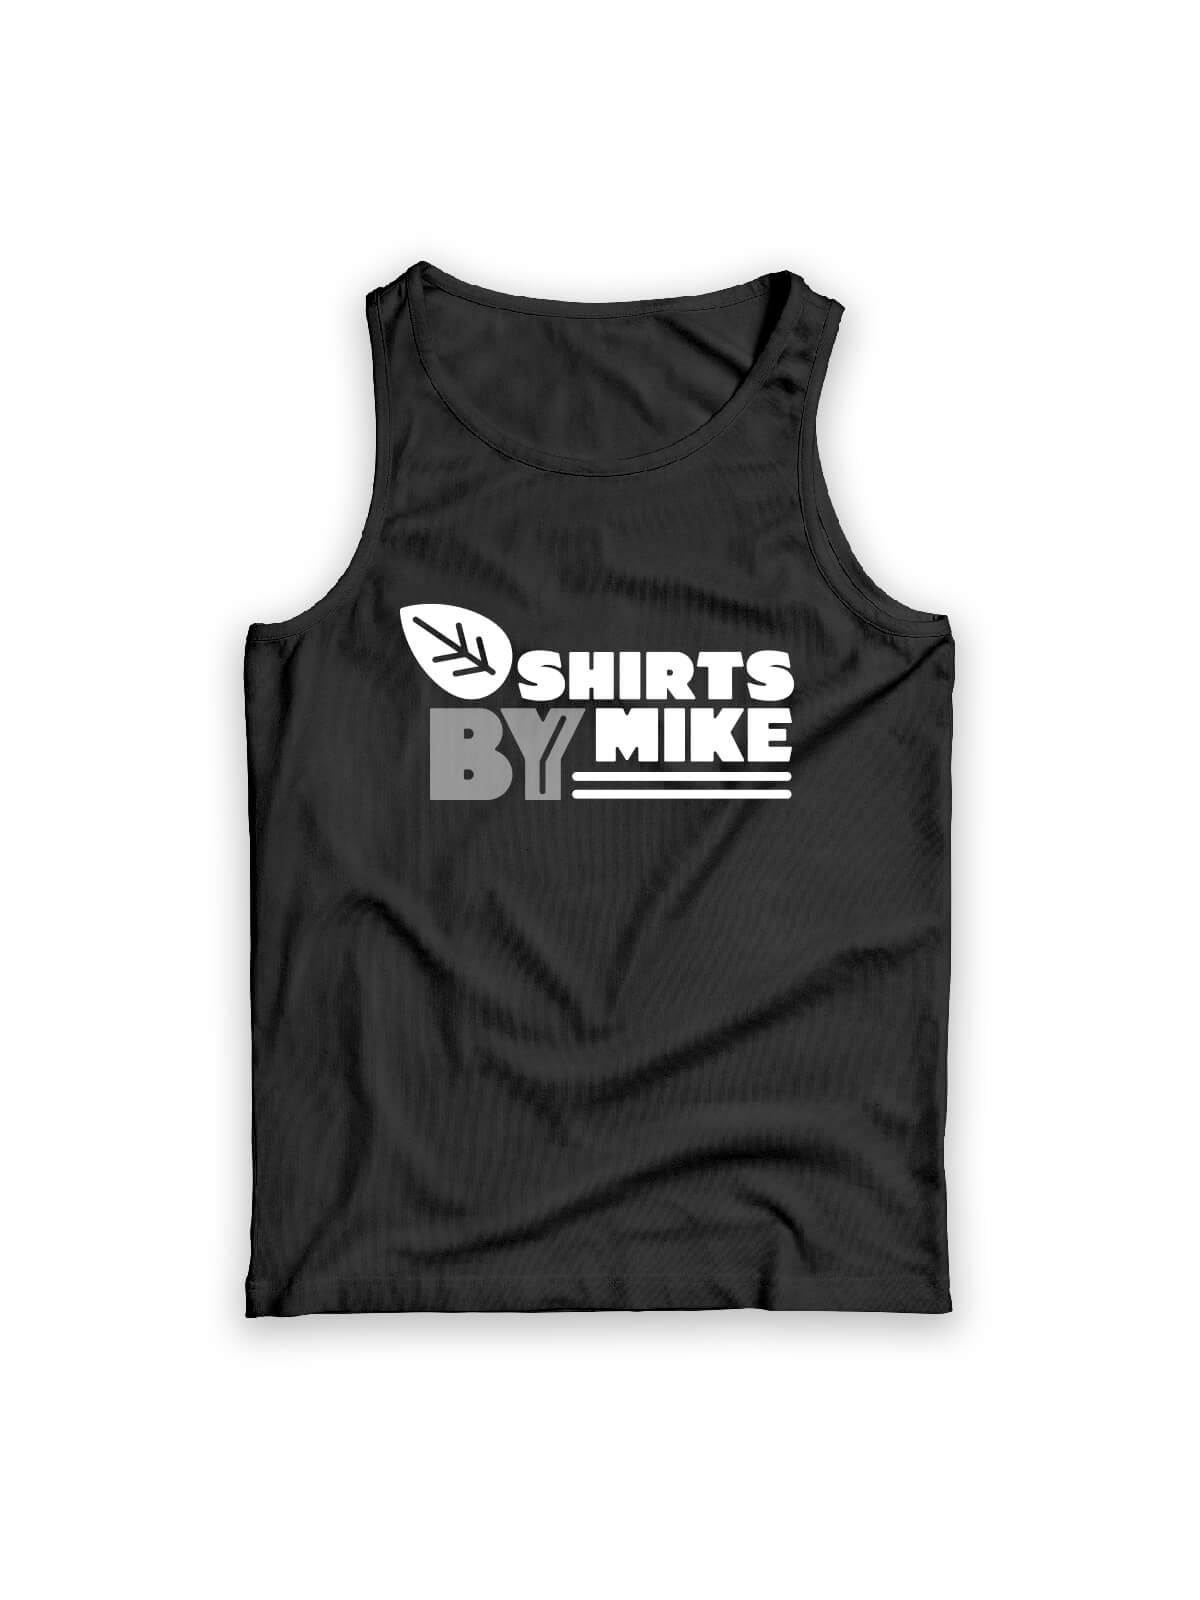 grey tank top with Shirts By Mike logo